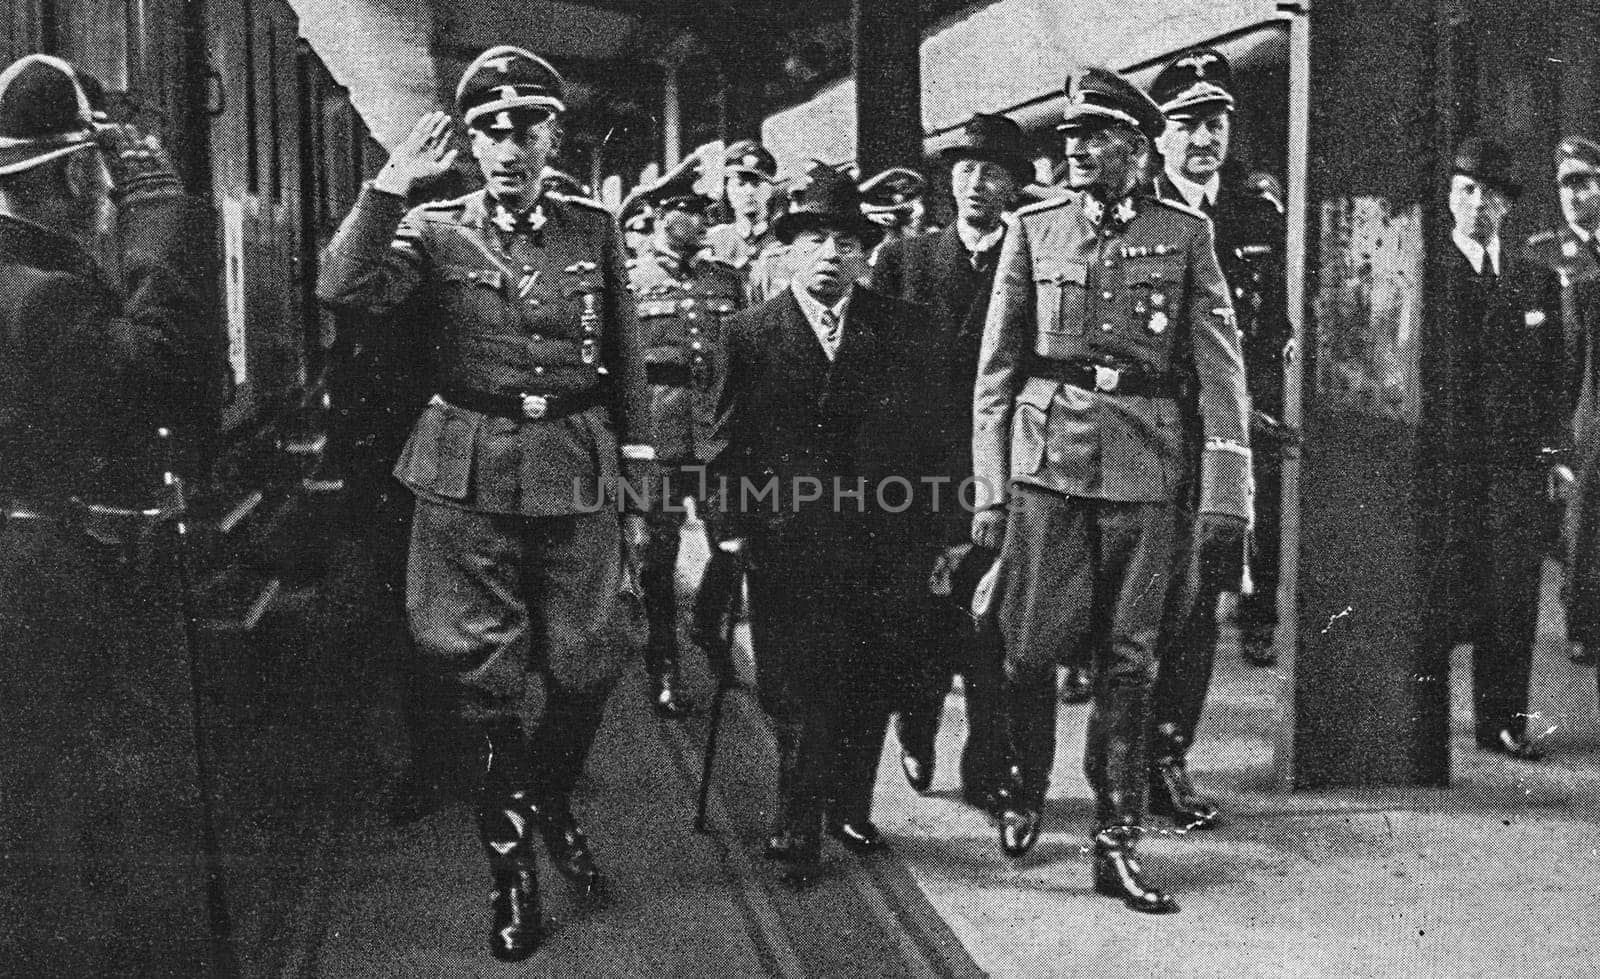 PRAGUE, PROTECTORATE OF BOHEMIA AND MORAVIA - APRIL 20, 1942: The Deputy Reich Protector Obergruppenf hrer Reinhard Heydrich, president Emil Hacha and then State Secretary Gruppenf hrer Karl Hermann Frank. On the day of Adolf Hitler's 53rd birthday, on April 20, 1942, State President Emil Hacha presented a gift from the Protectorate of Bohemia and Moravia to Hitler at the Central Station in Prague by roman_nerud